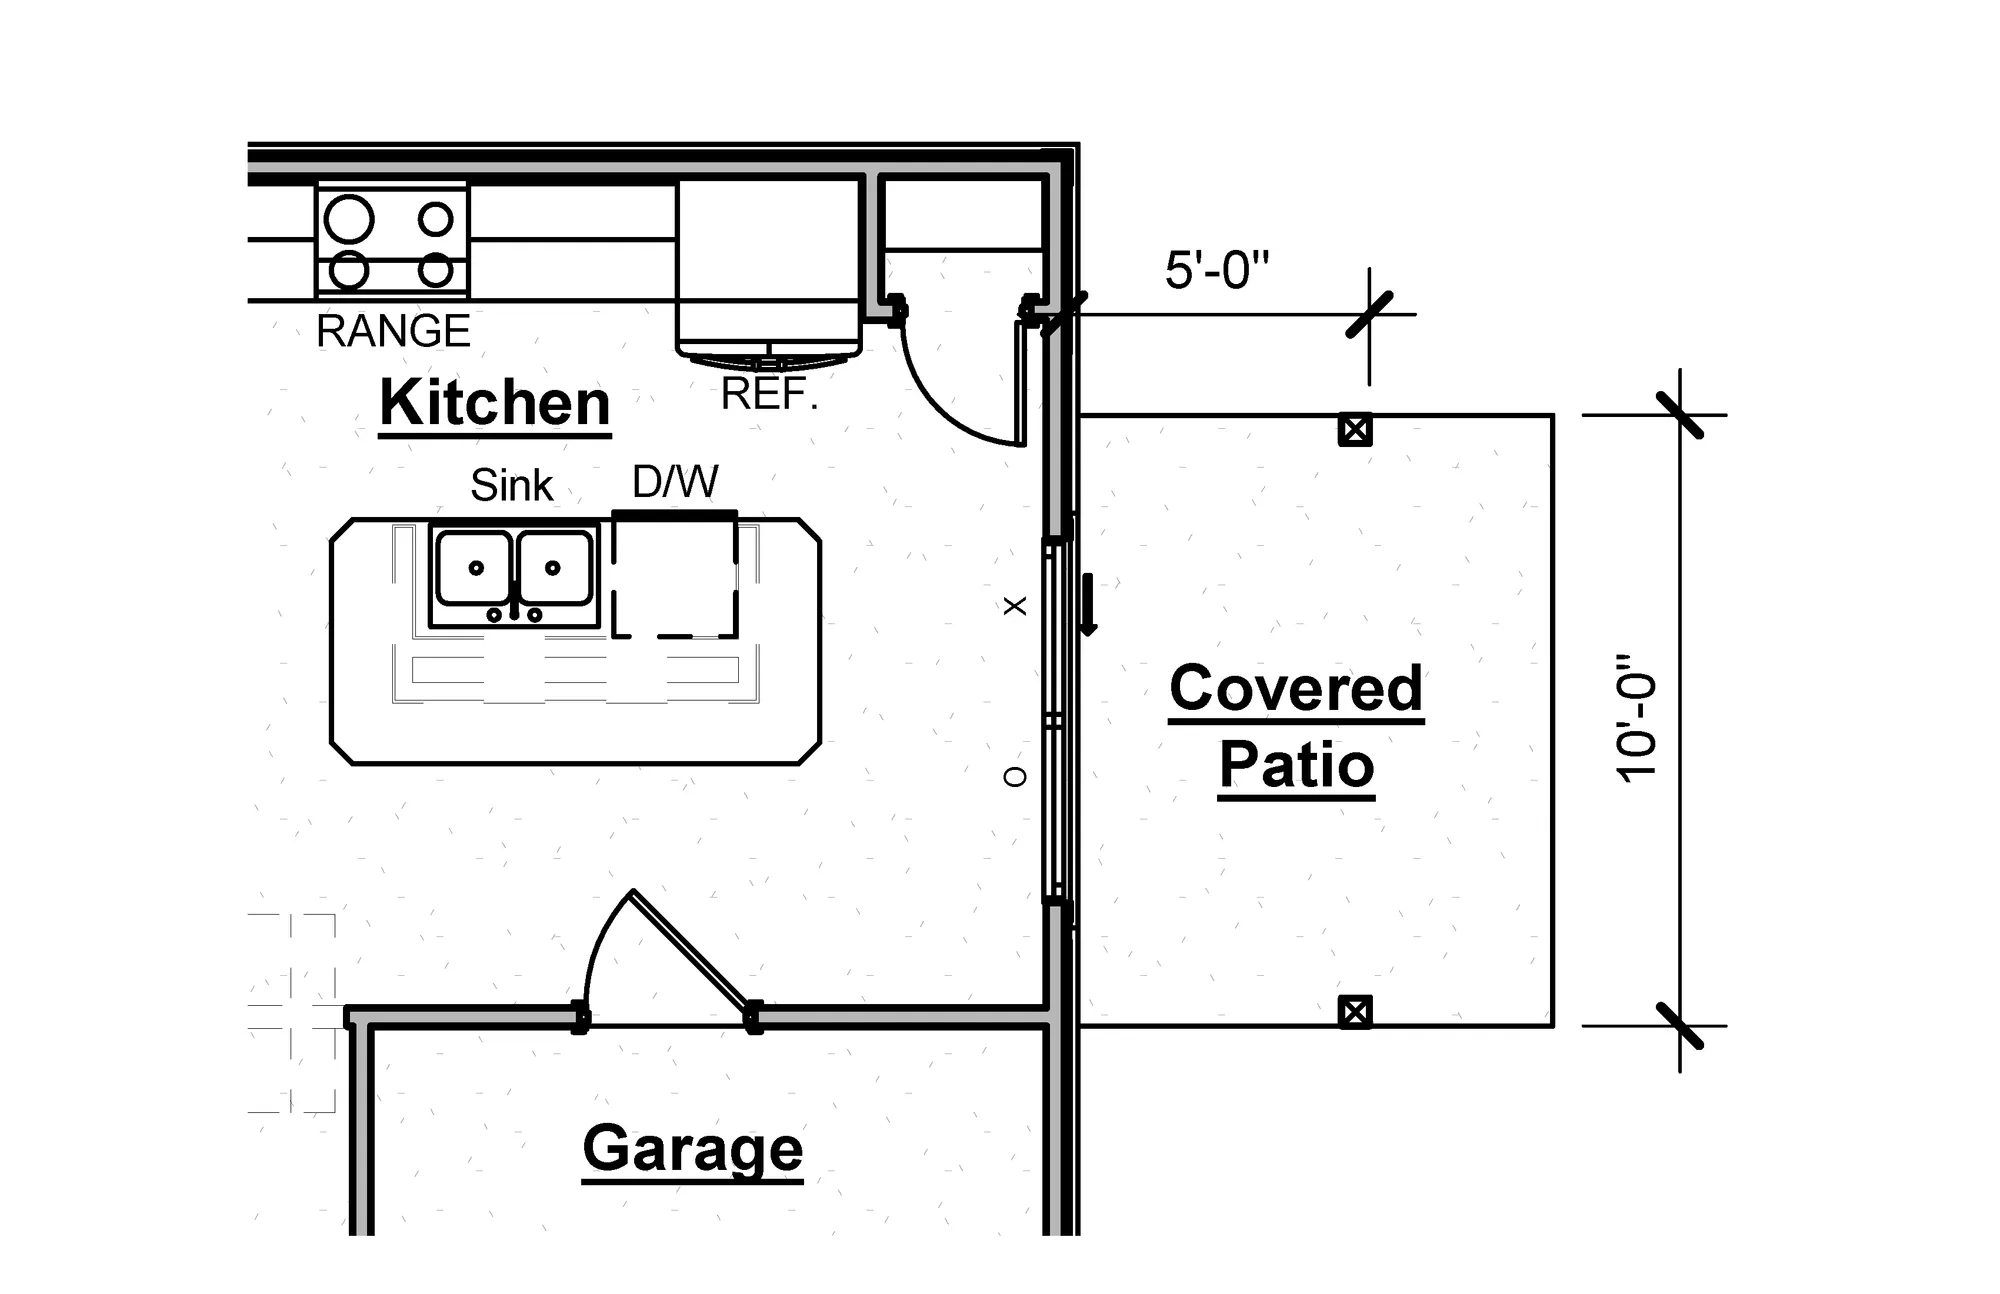 Covered Patio Option - undefined